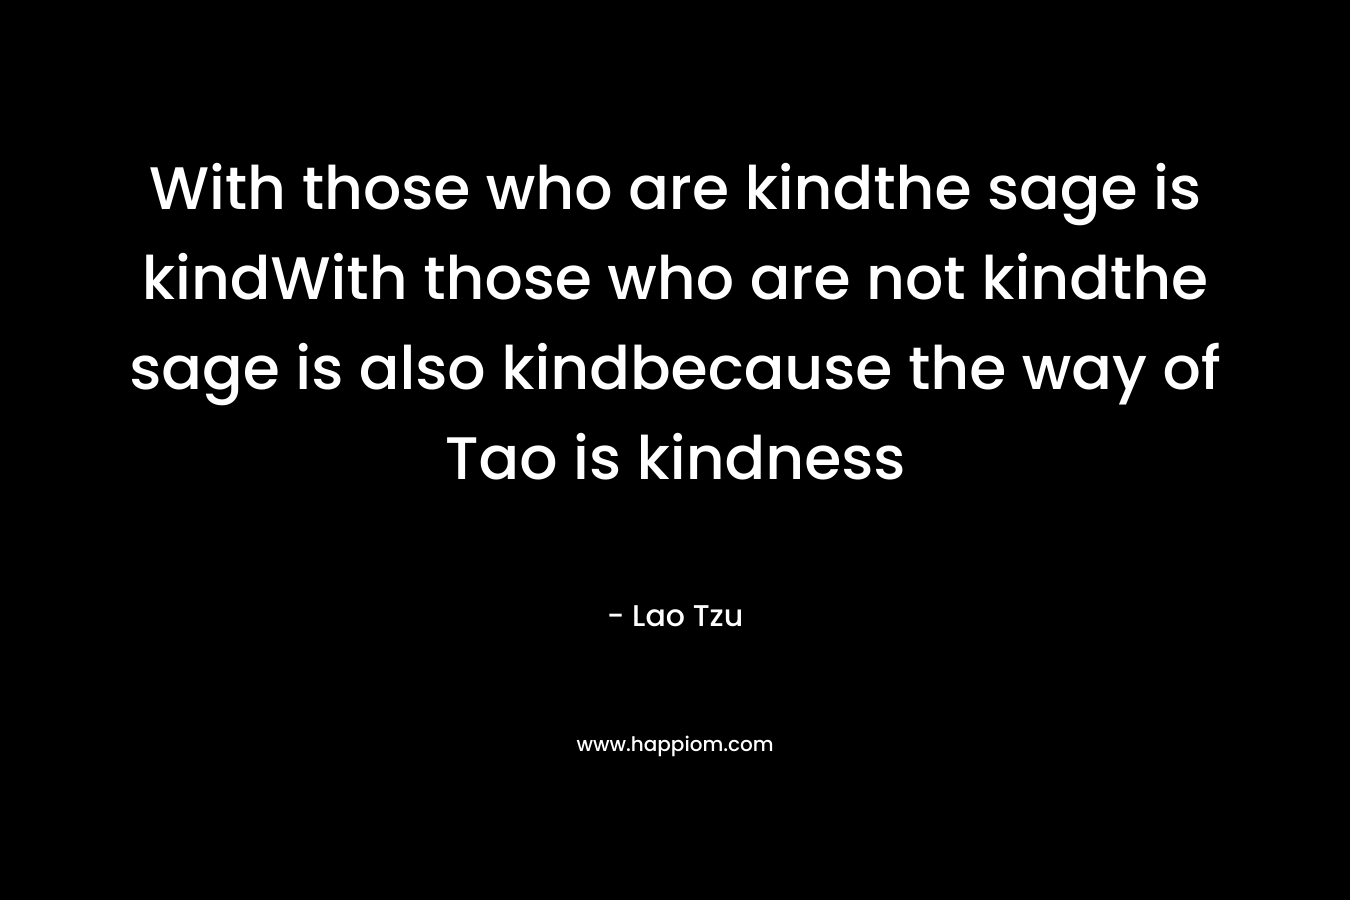 With those who are kindthe sage is kindWith those who are not kindthe sage is also kindbecause the way of Tao is kindness